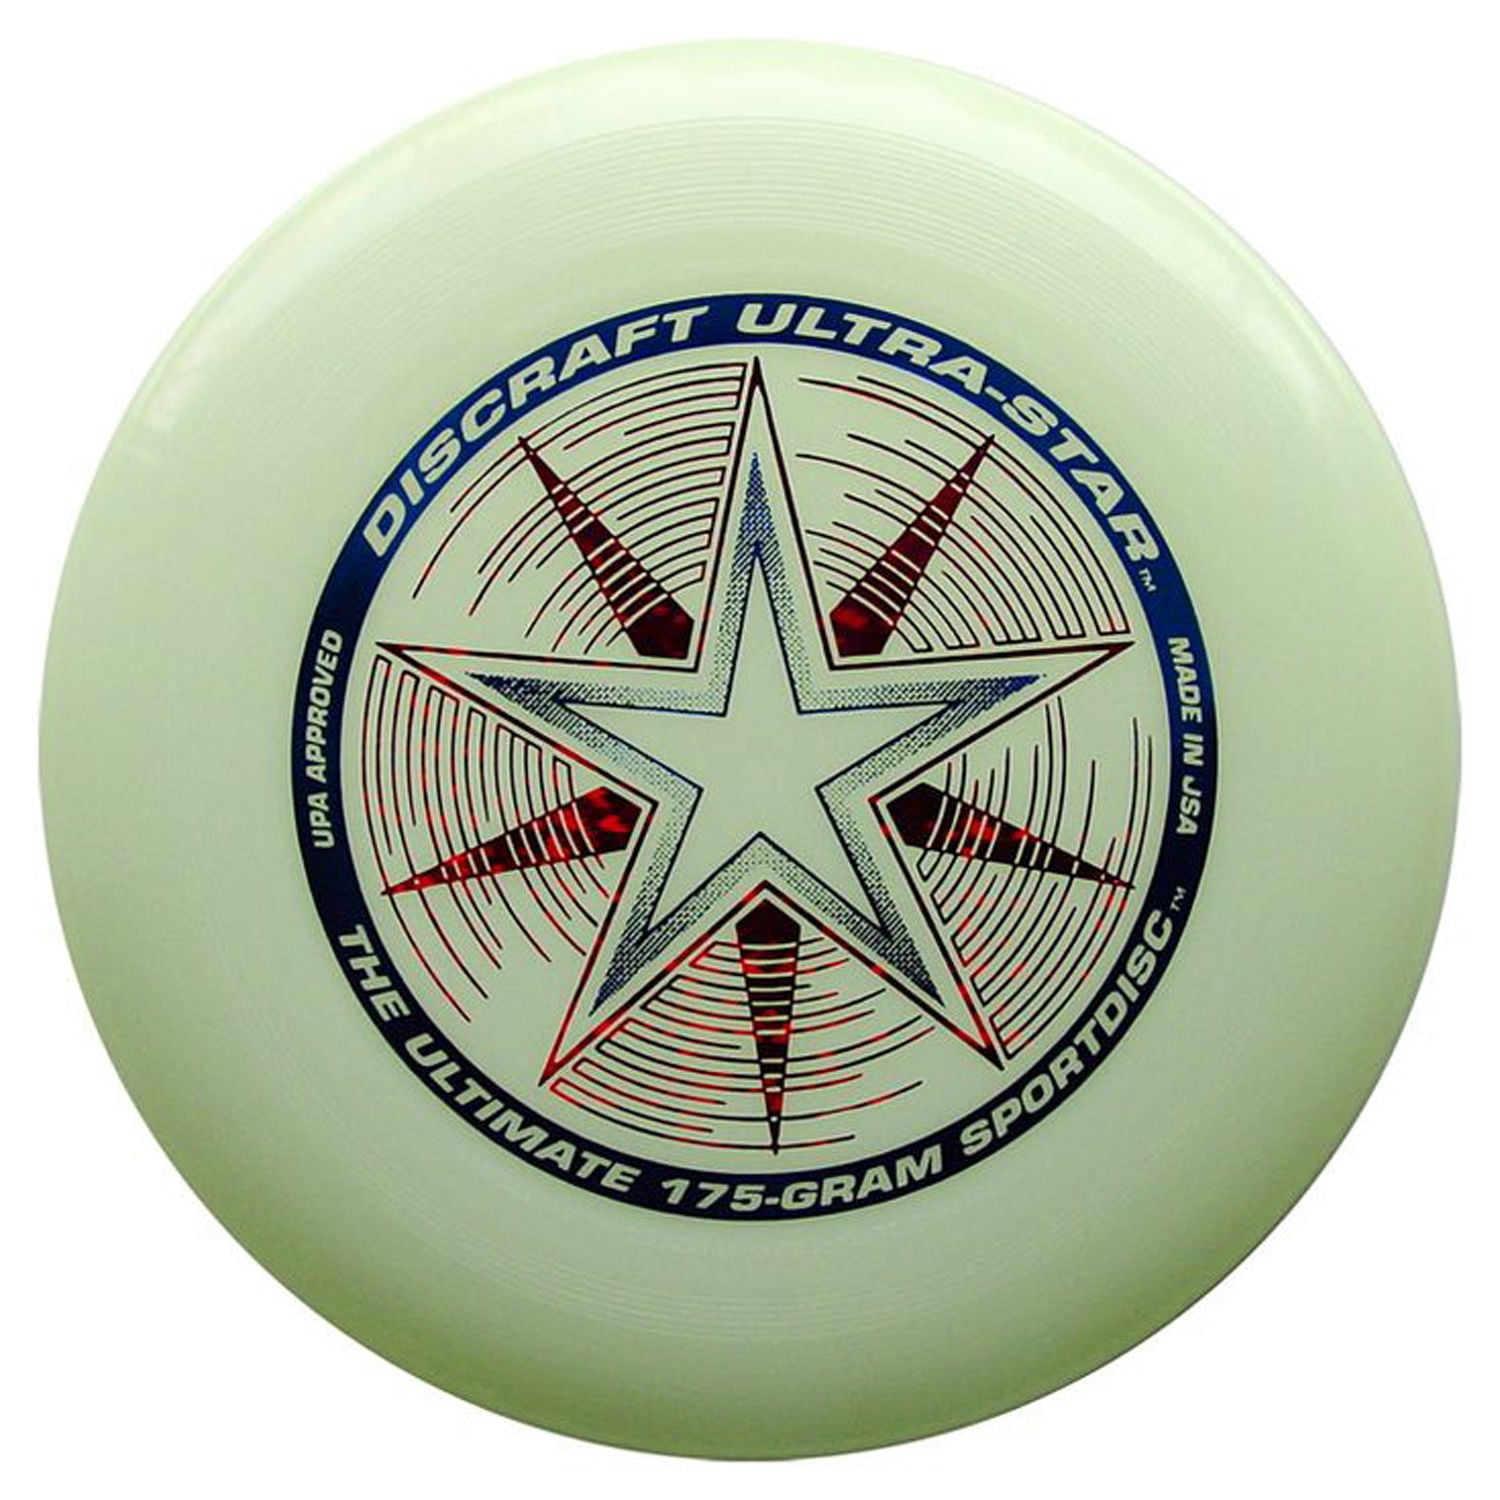 NEW Discraft ULTRA-STAR 175g Ultimate Frisbee Disc 3 Pack BLUE/GREEN/WHITE